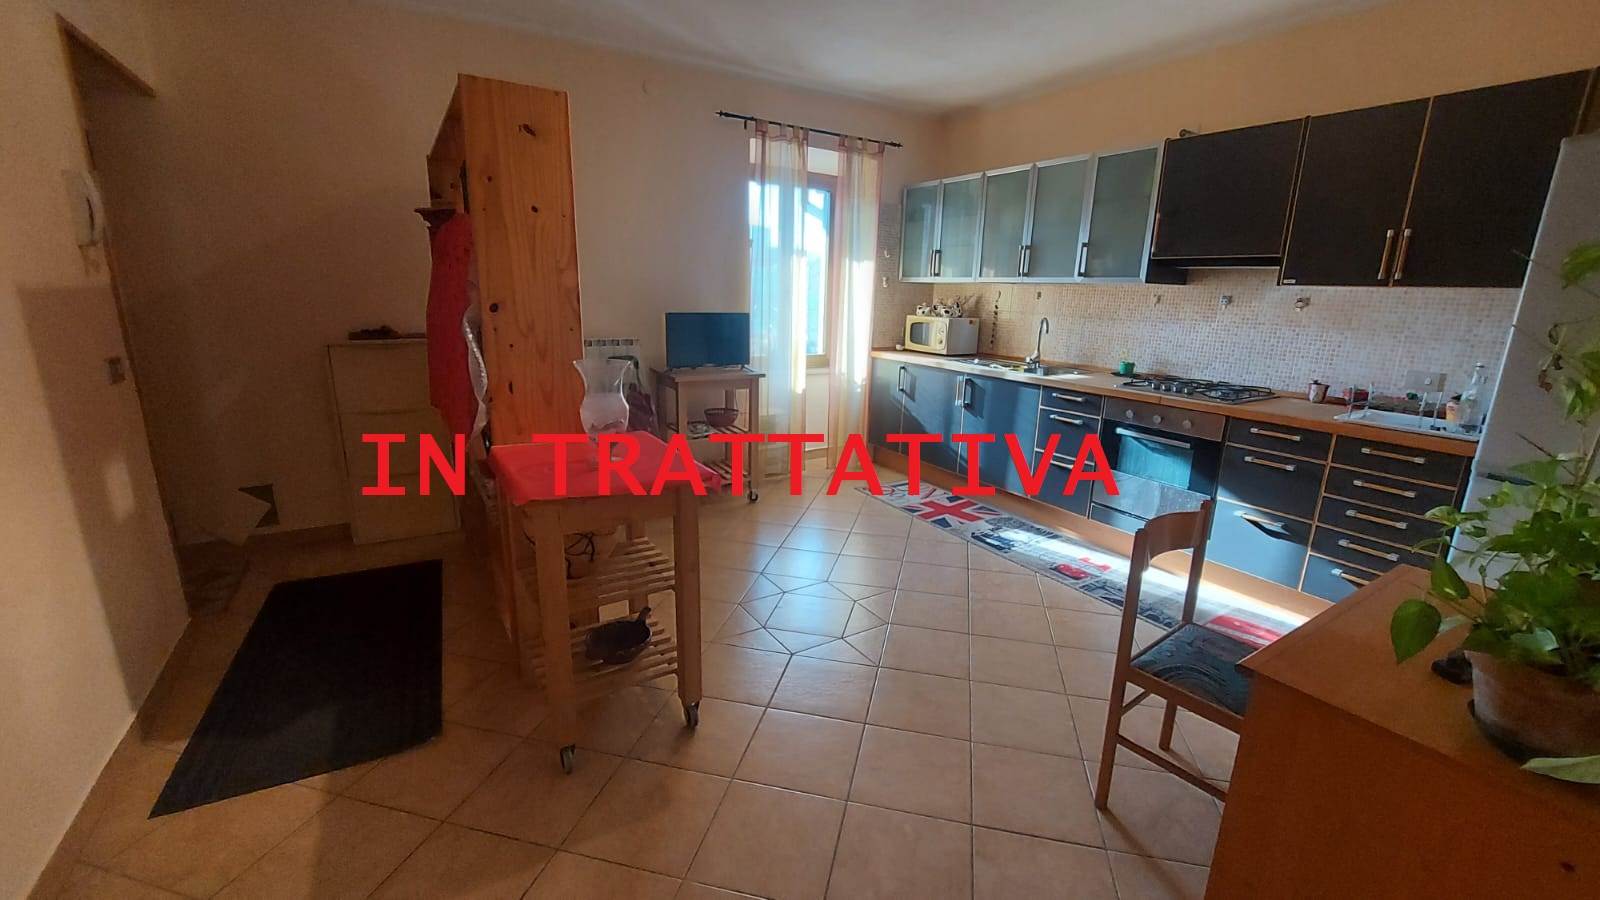 POZZUOLO MARTESANA, Detached apartment for sale of 100 Sq. mt., Good condition, Heating Individual heating system, Energetic class: G, placed at 2°, 